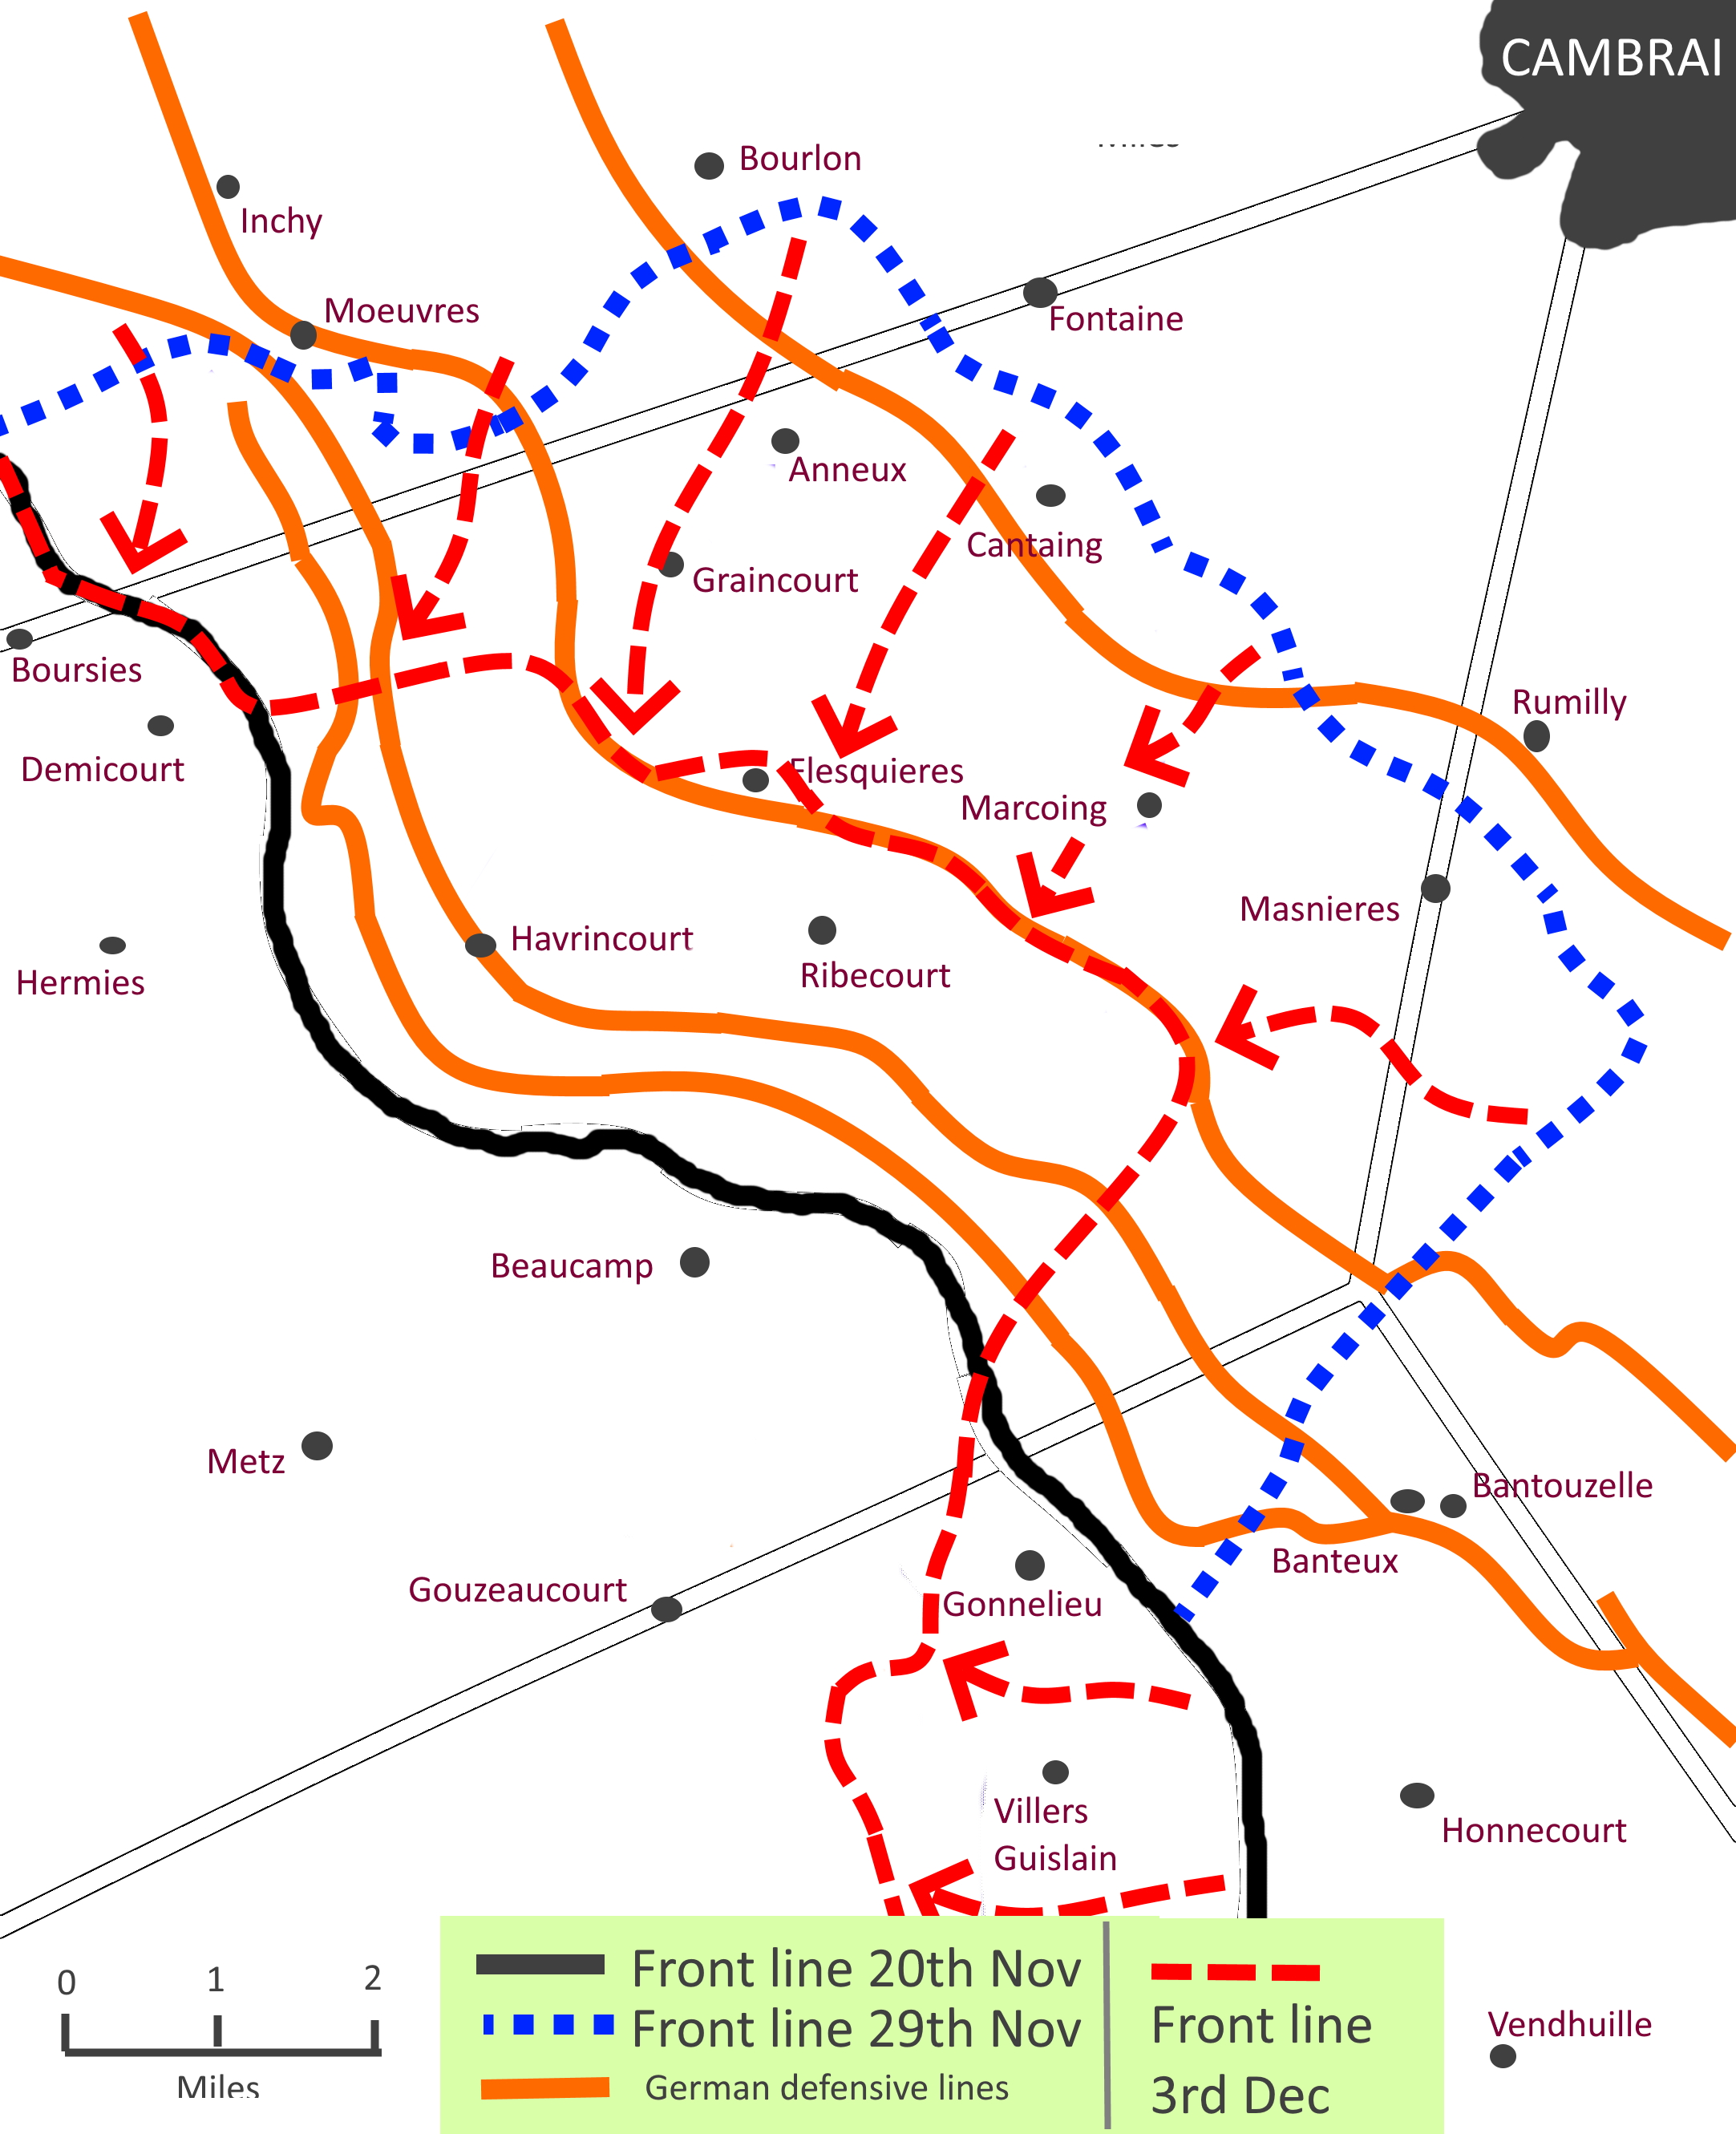 Battle of Cambrai map